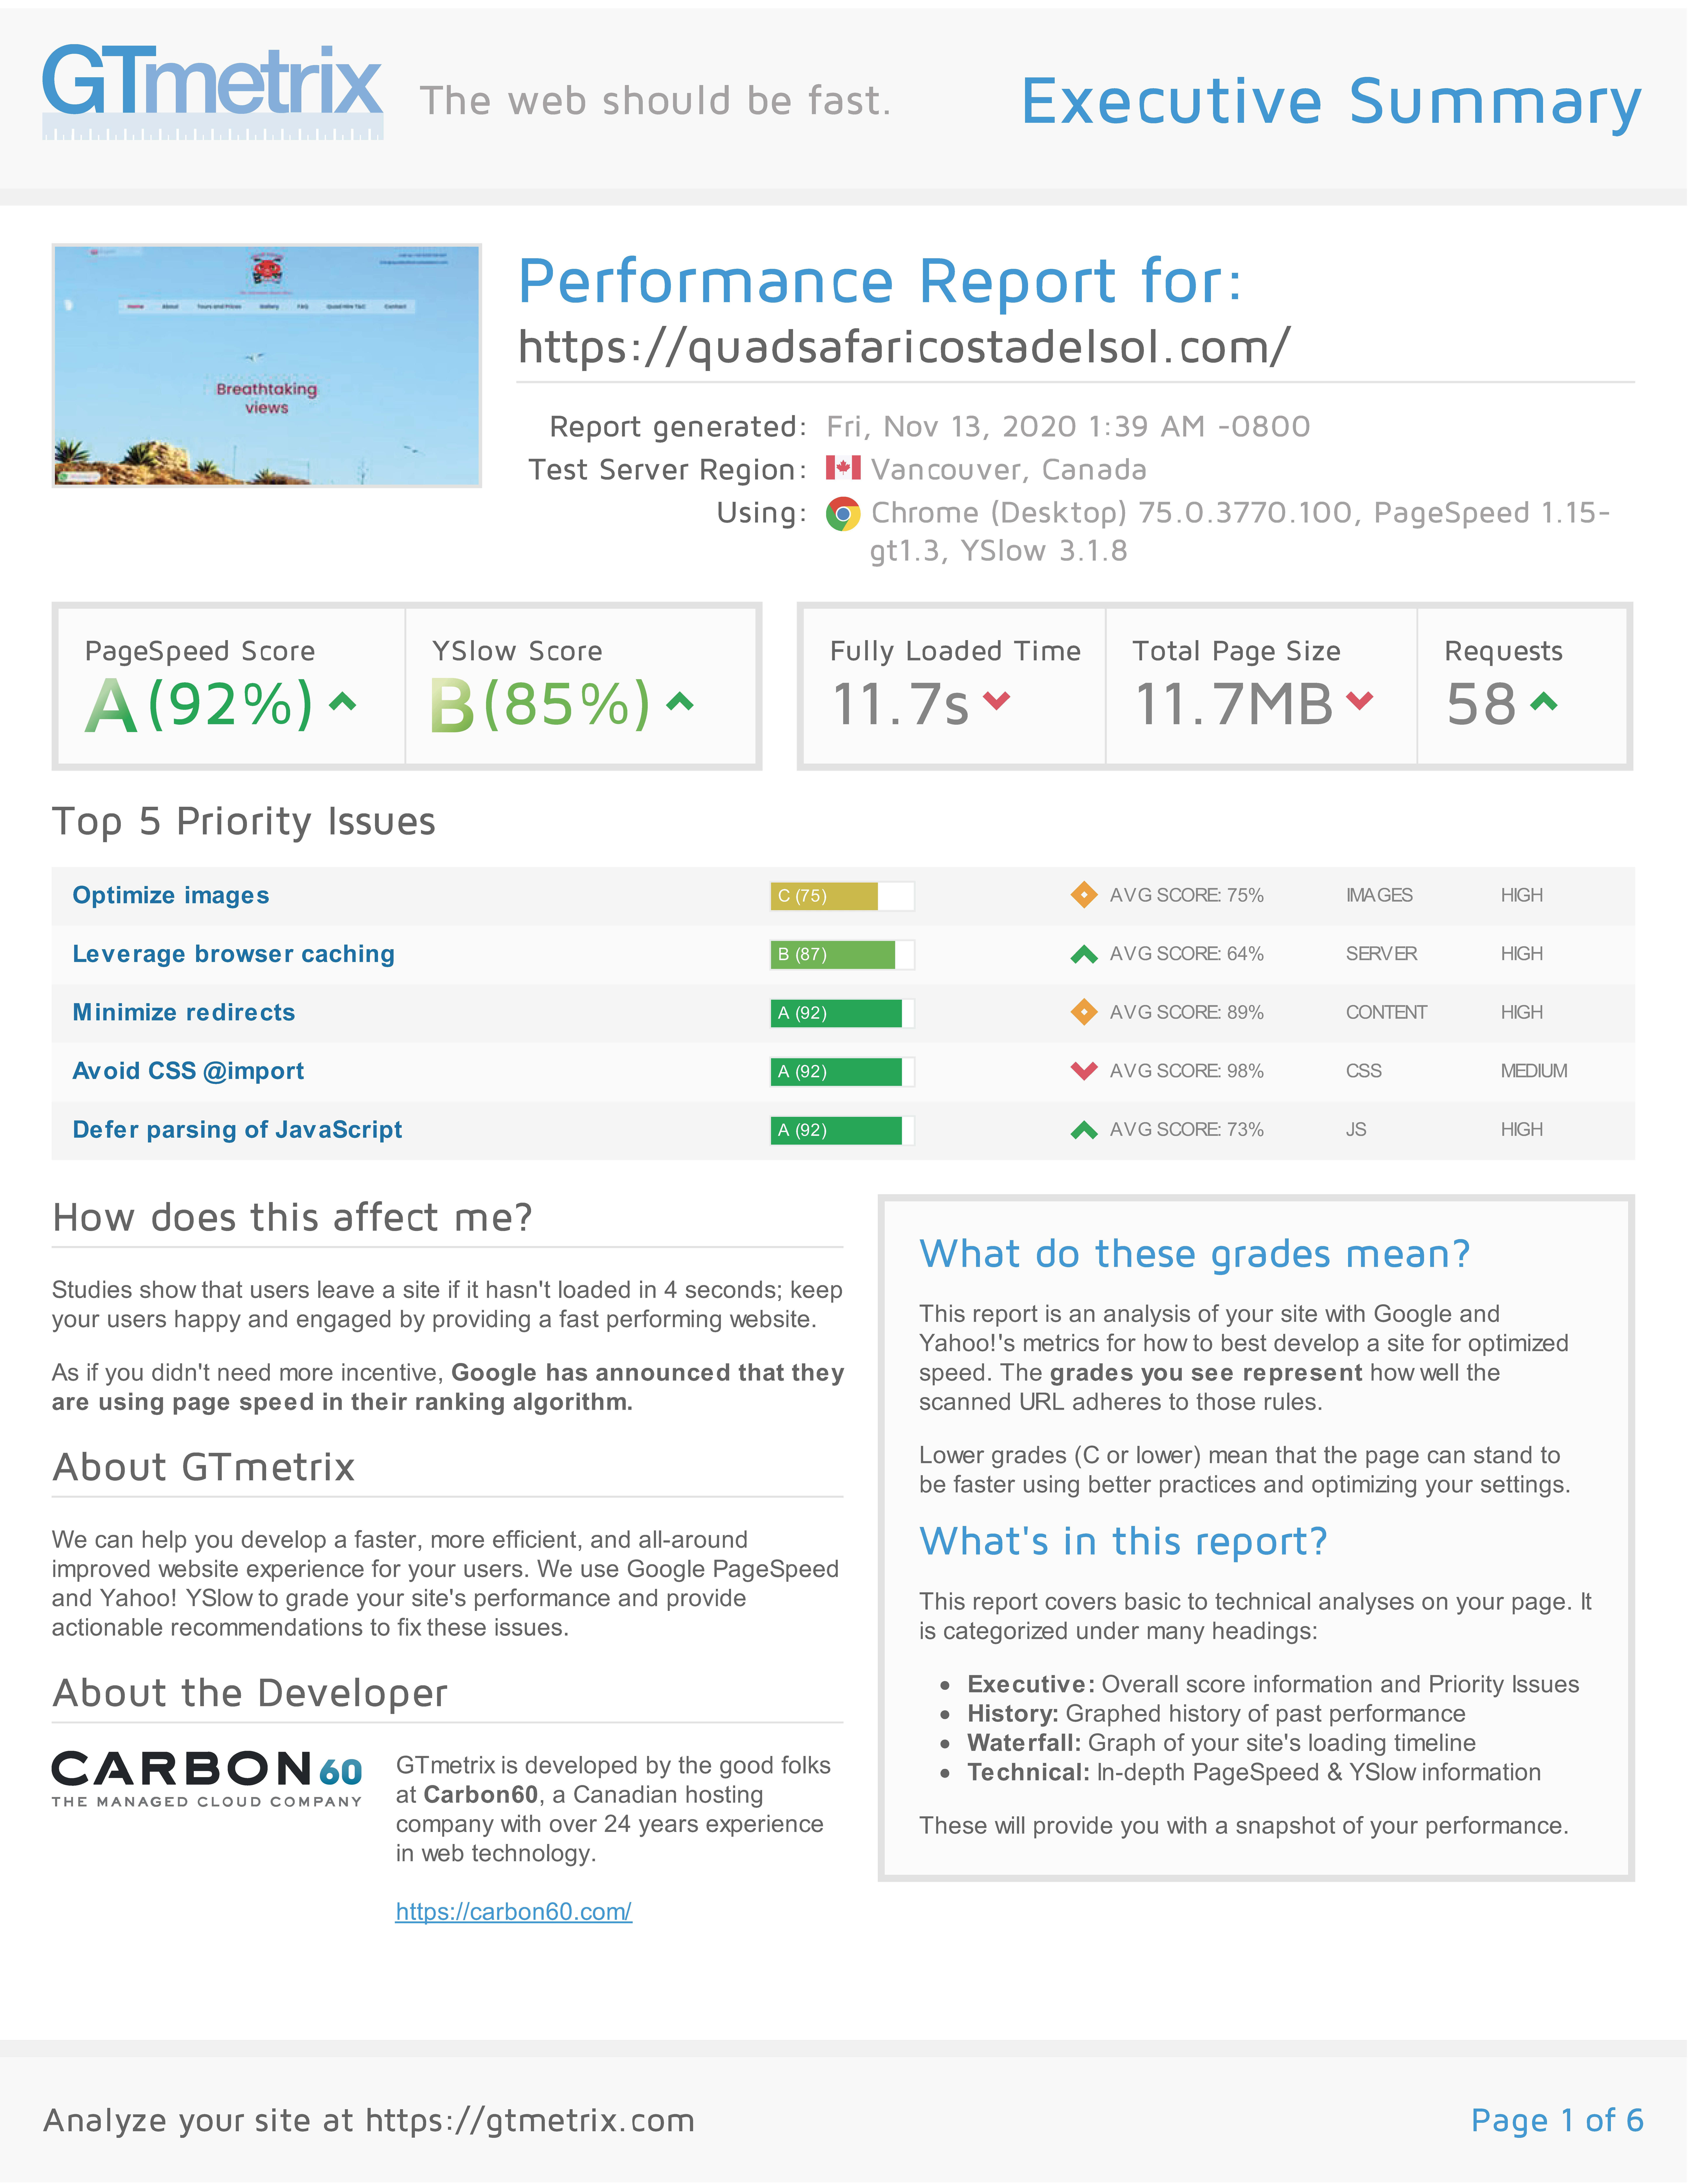 GTMetrix report rating page's speed A